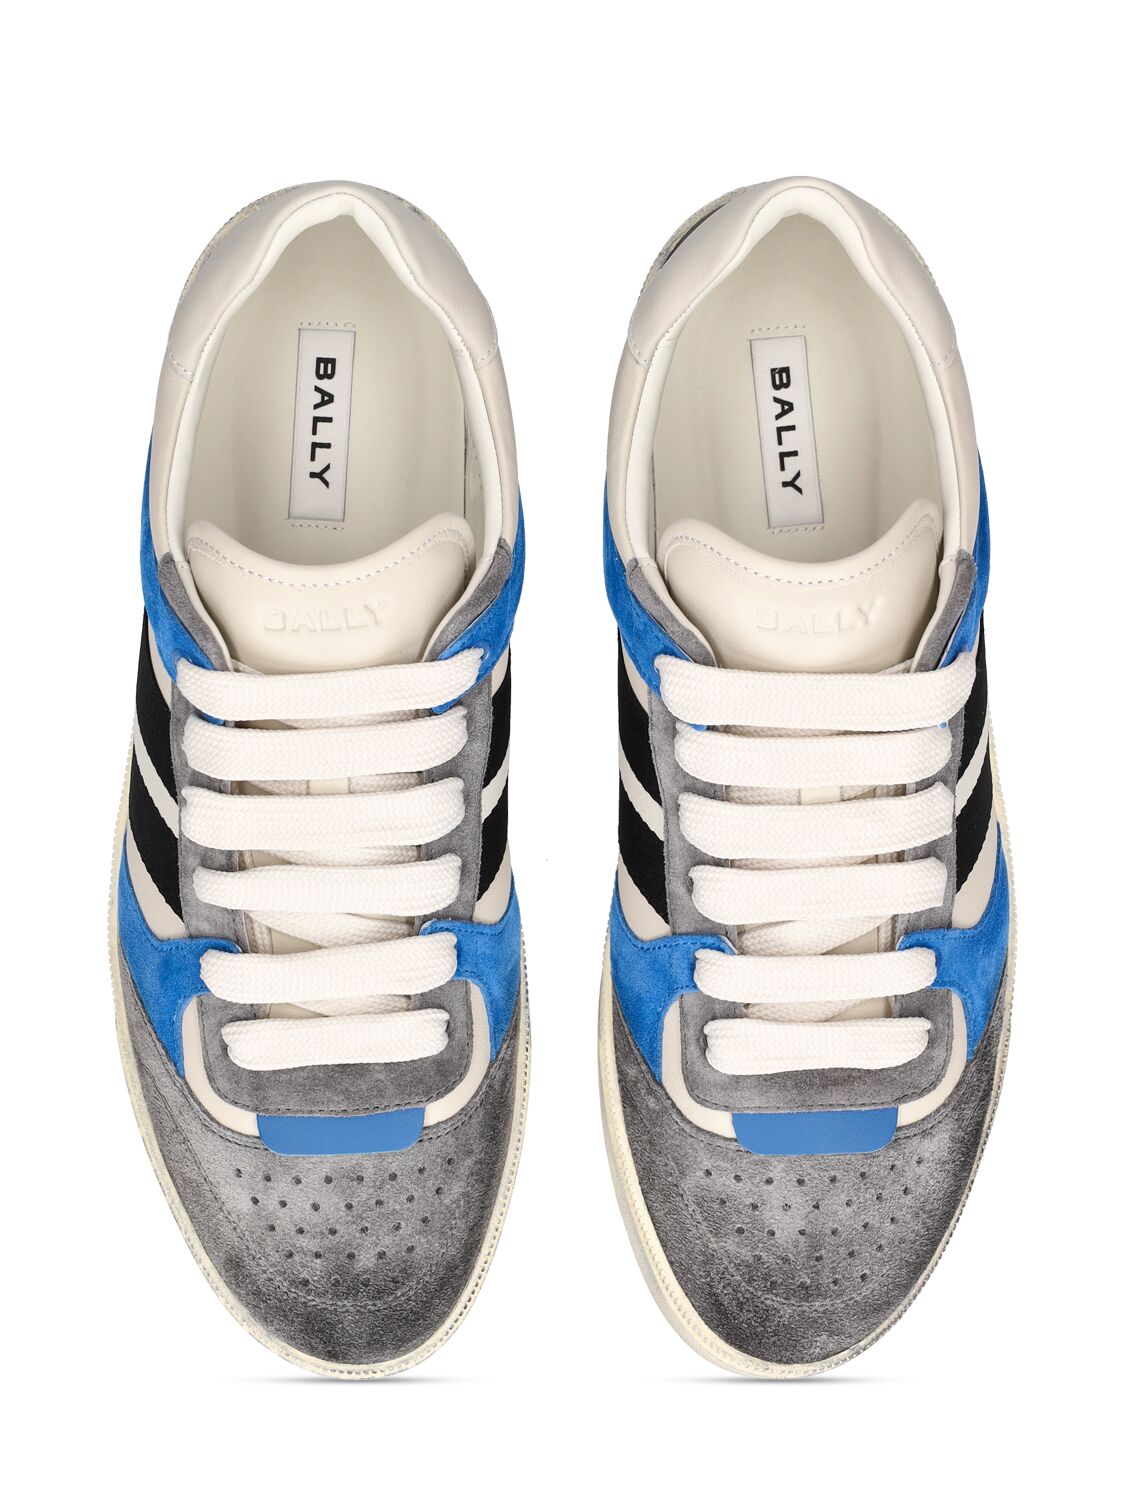 Shop Bally Rebby Leather & Suede Sneakers In Grey,blue